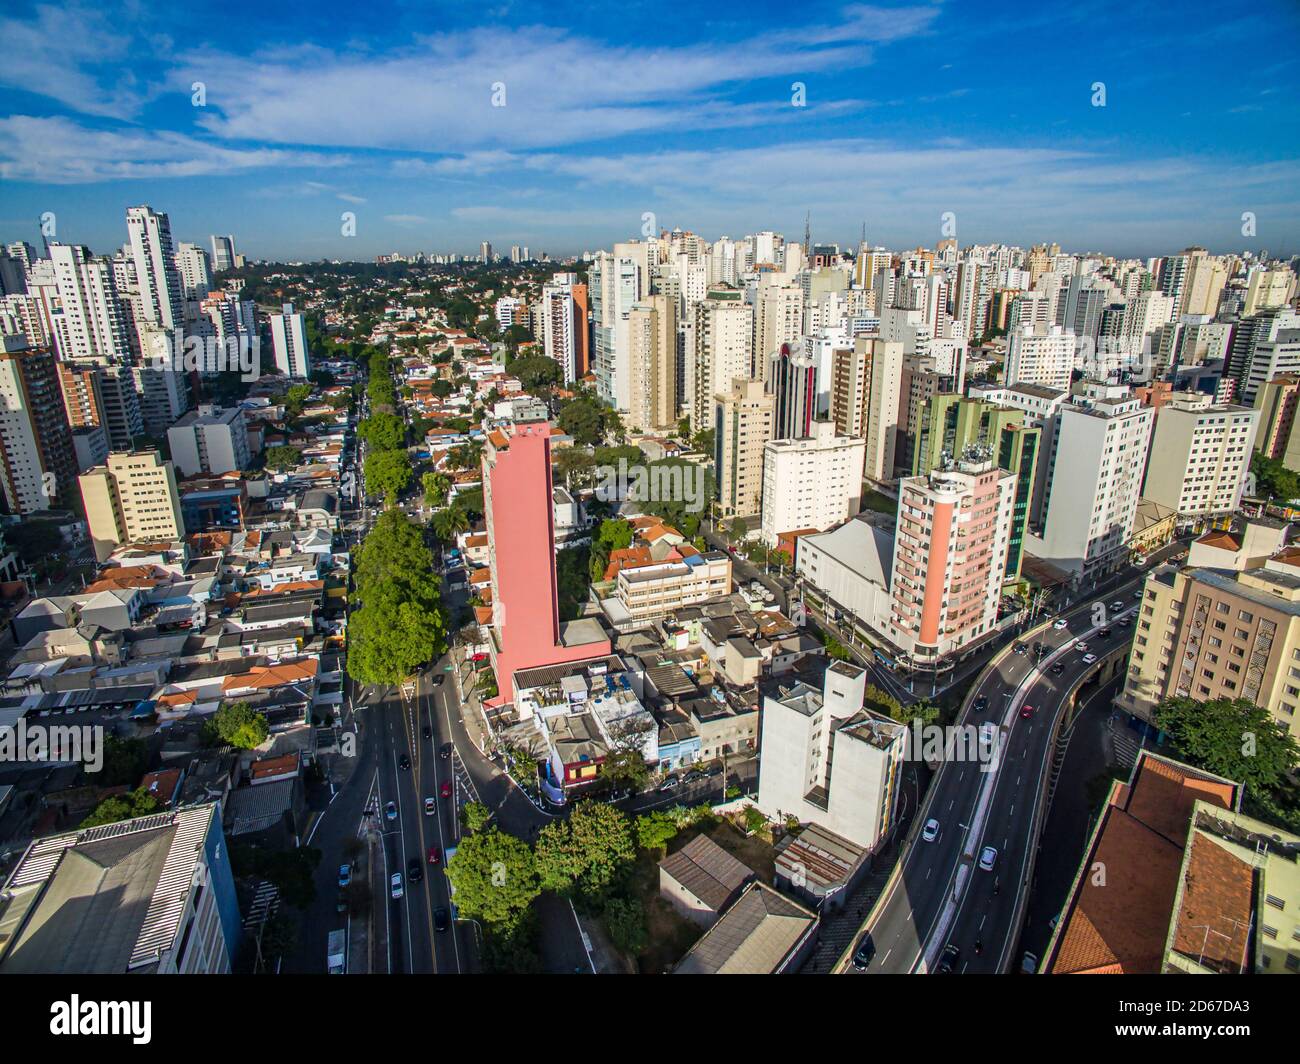 Metropole view from above. Aerial view of Sao Paulo city, Brazil. Stock Photo